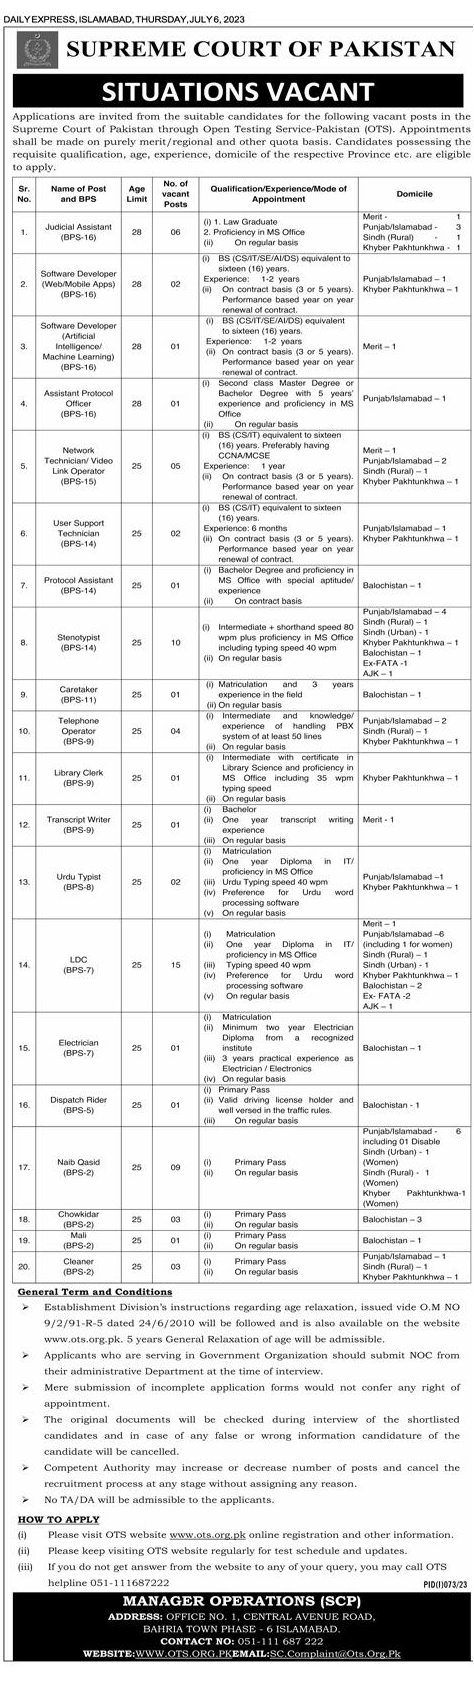 Latest Vacancies in Supreme Court of Pakistan (SCP) July 2023